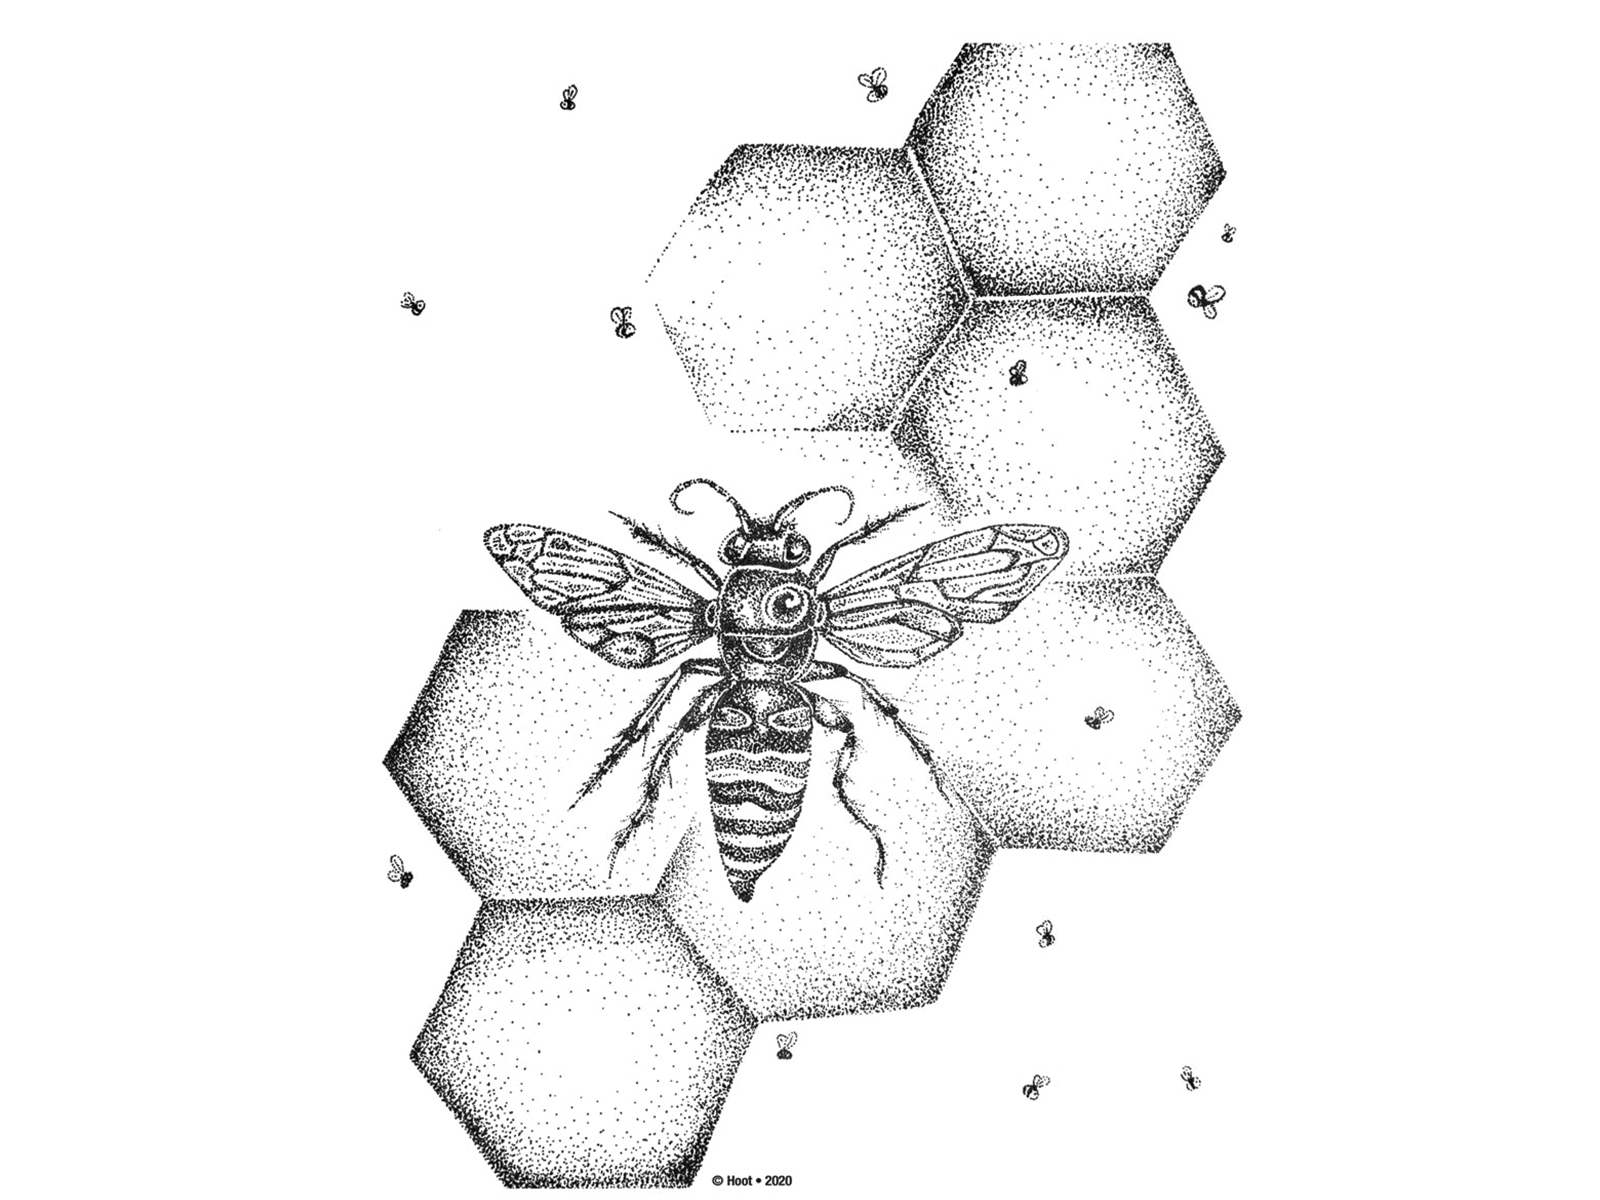 Pen and ink stipple illustration of bees and by Jen Borror